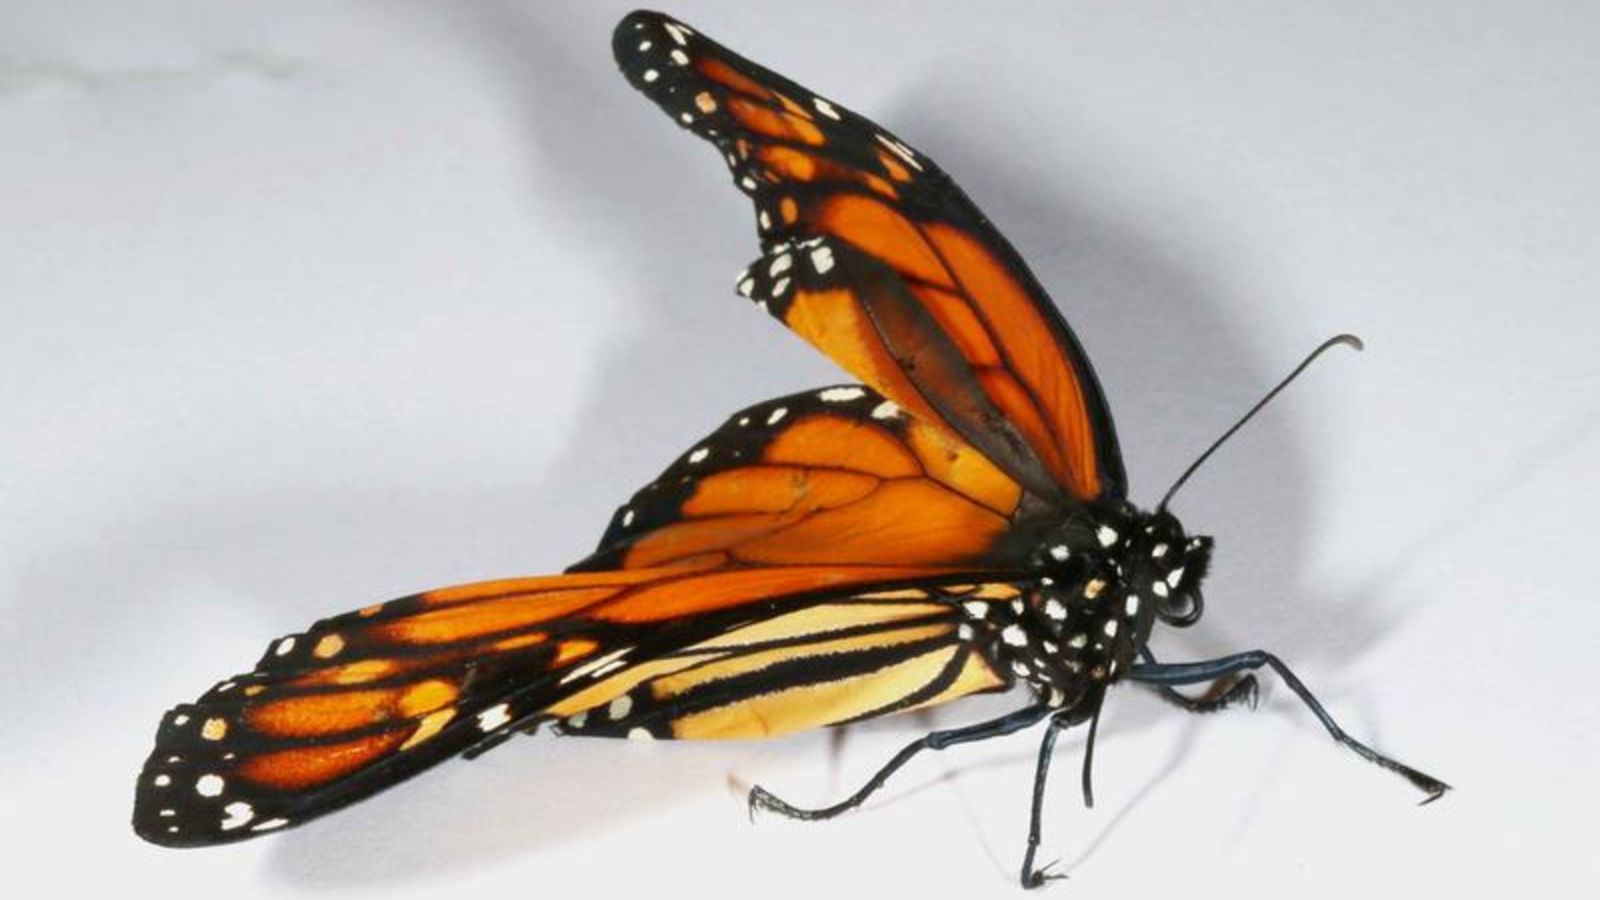 Monarch butterflies increasingly plagued by parasites, study shows